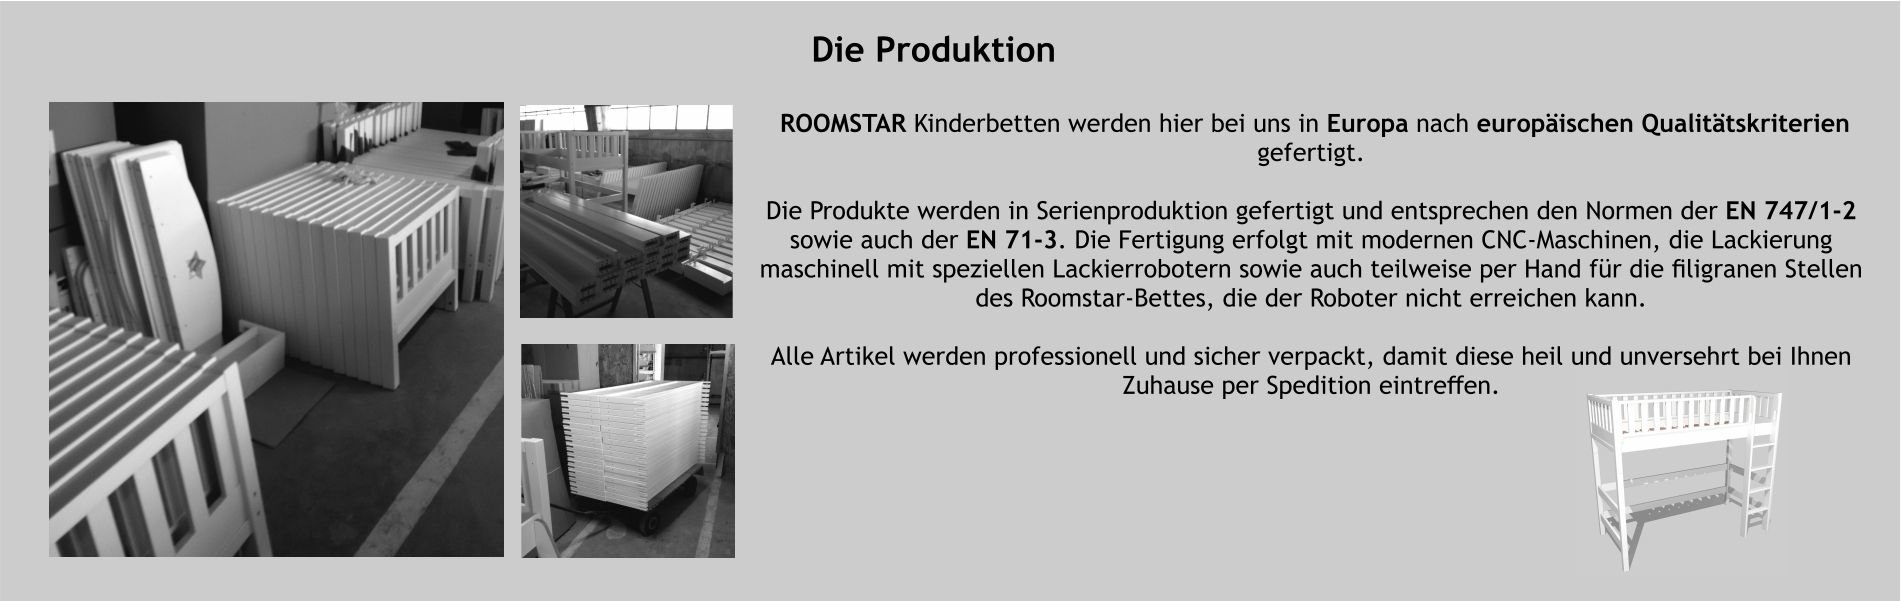 Roomstar Produktion in Europa